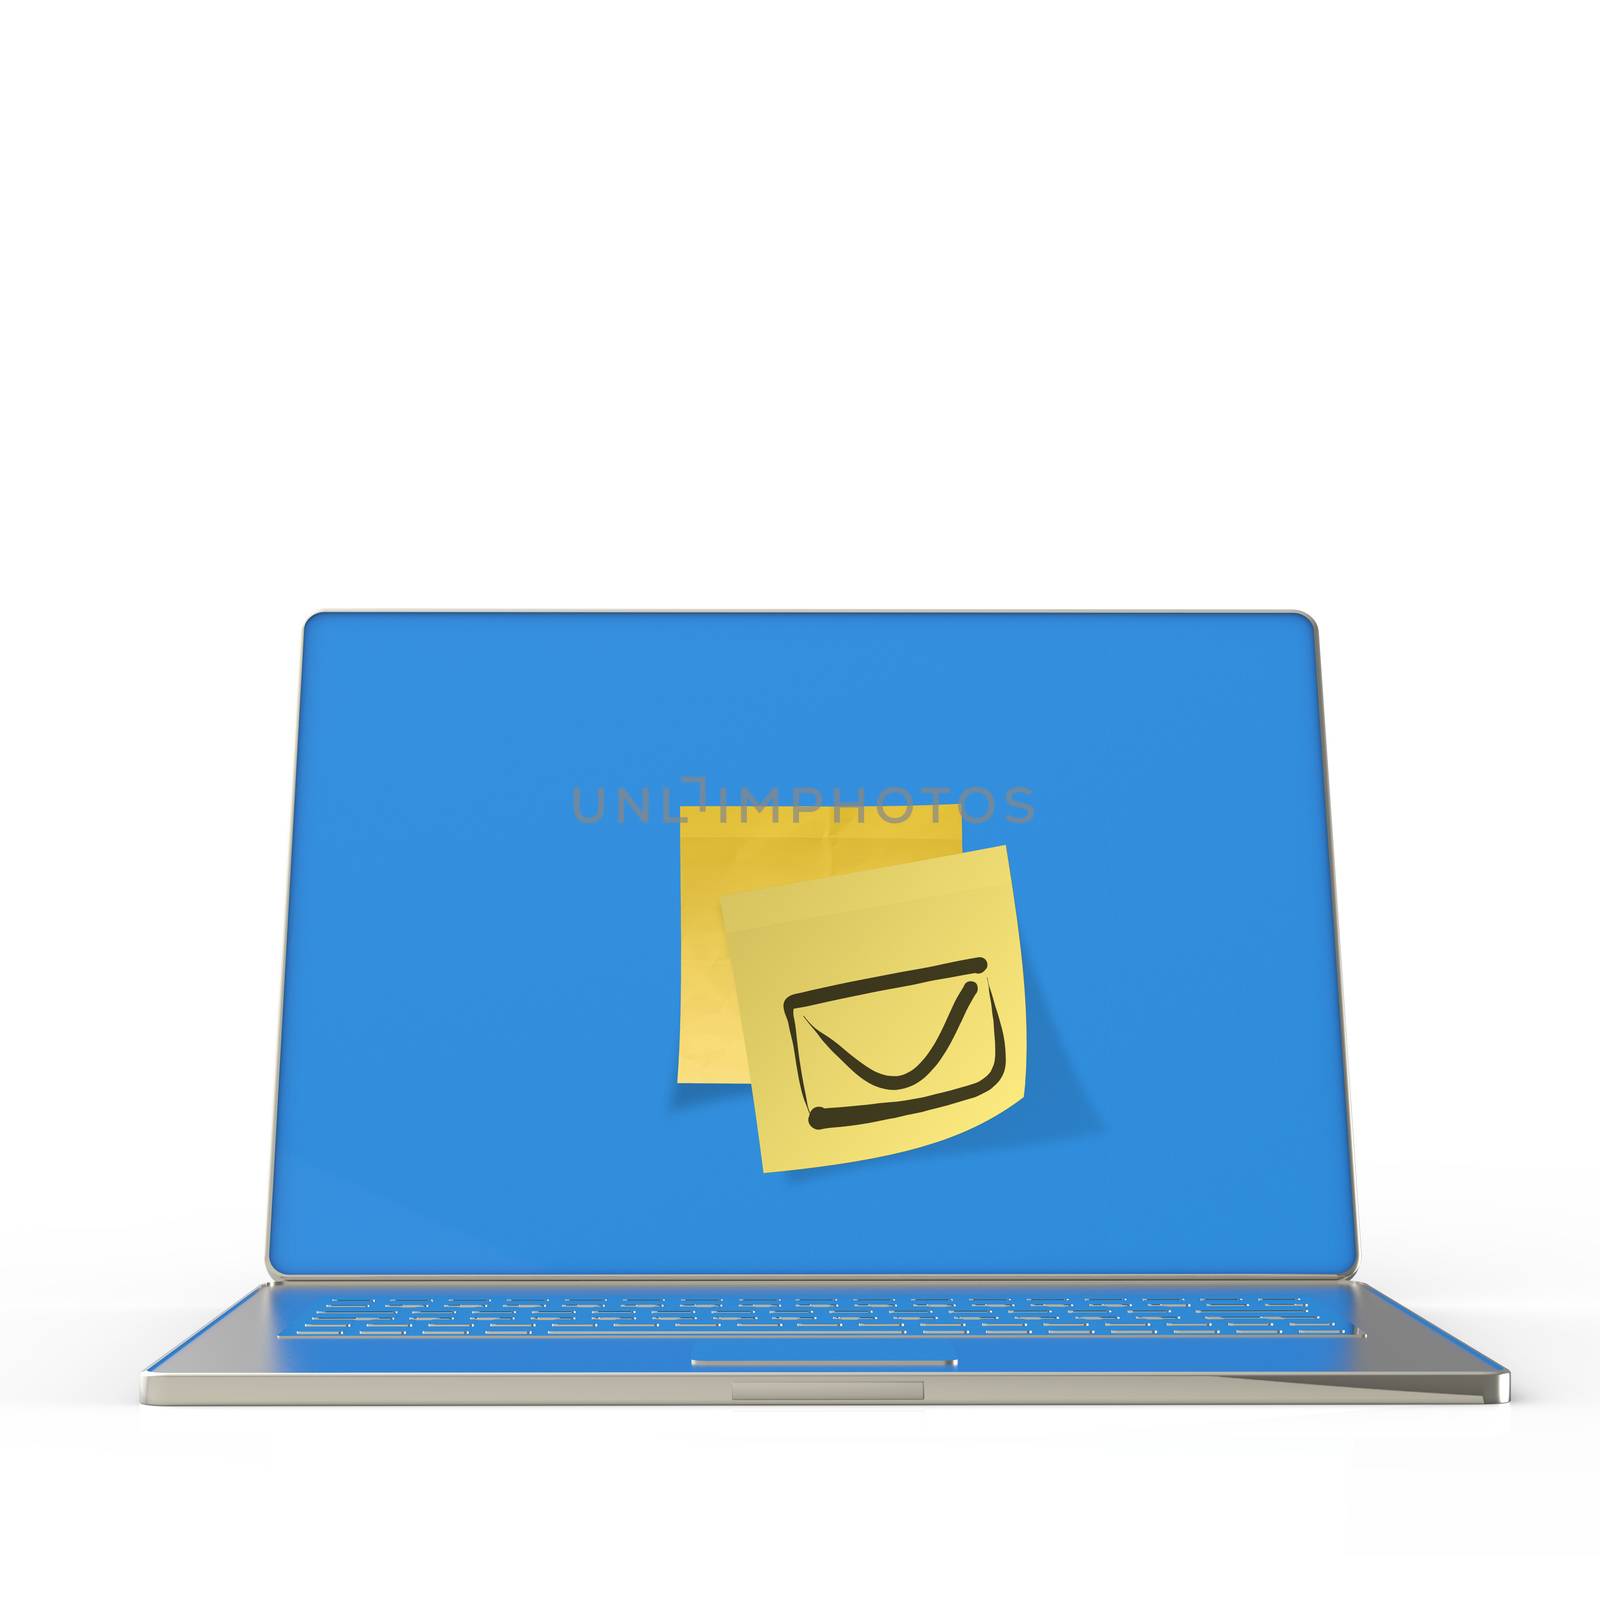  e-mail sign on sticky note on 3d laptop computer  by everythingpossible